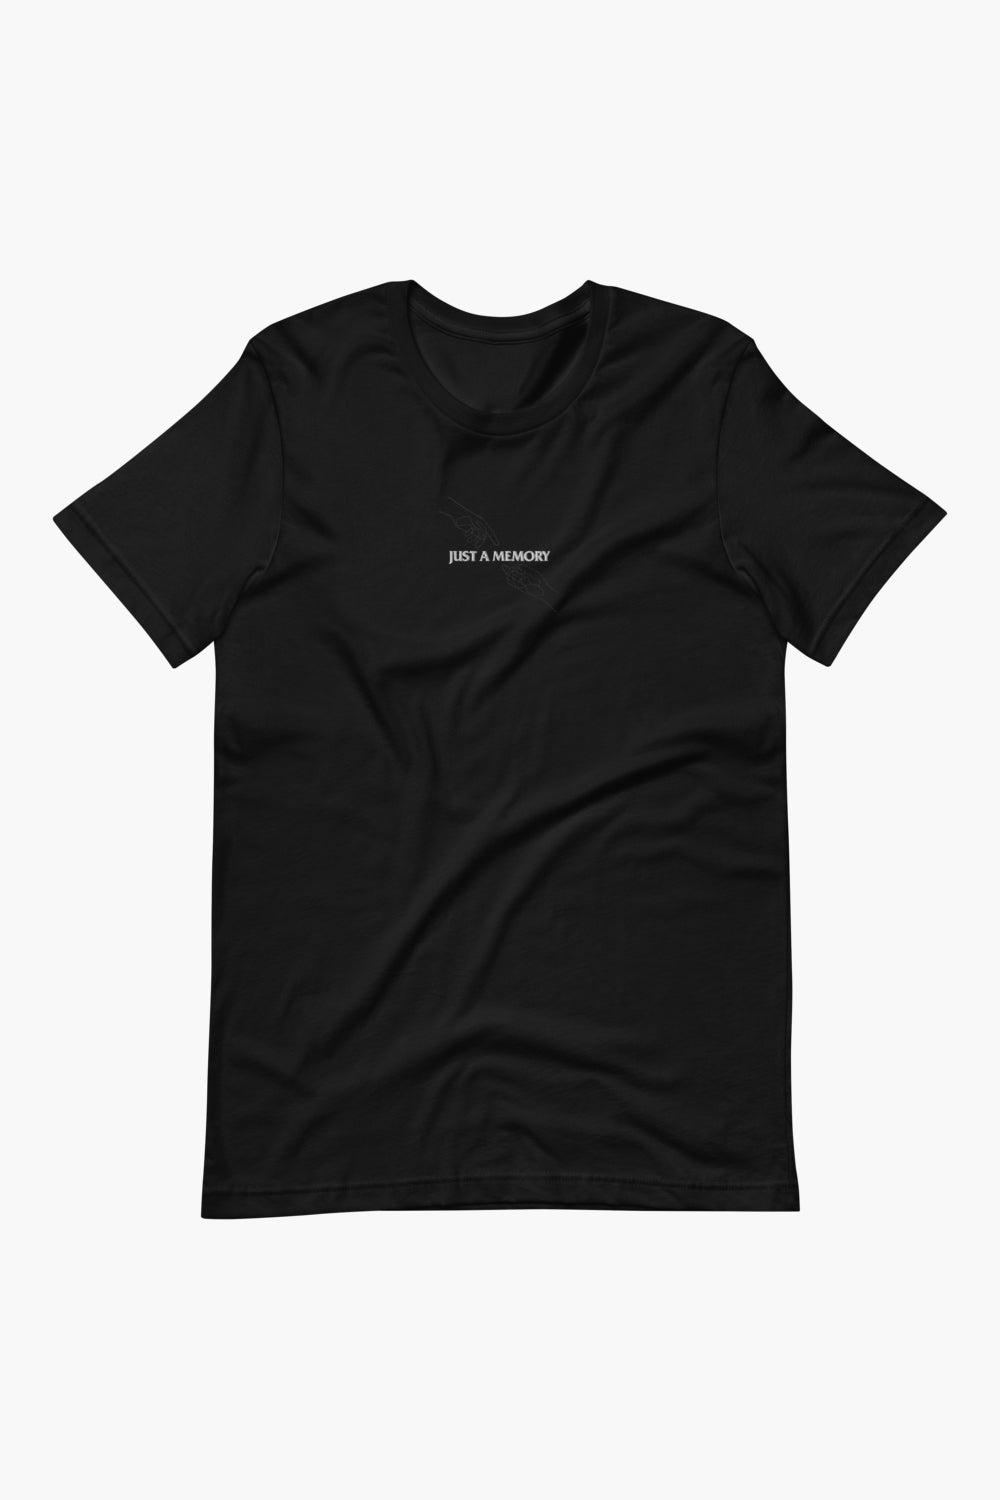 Just a Memory Tee